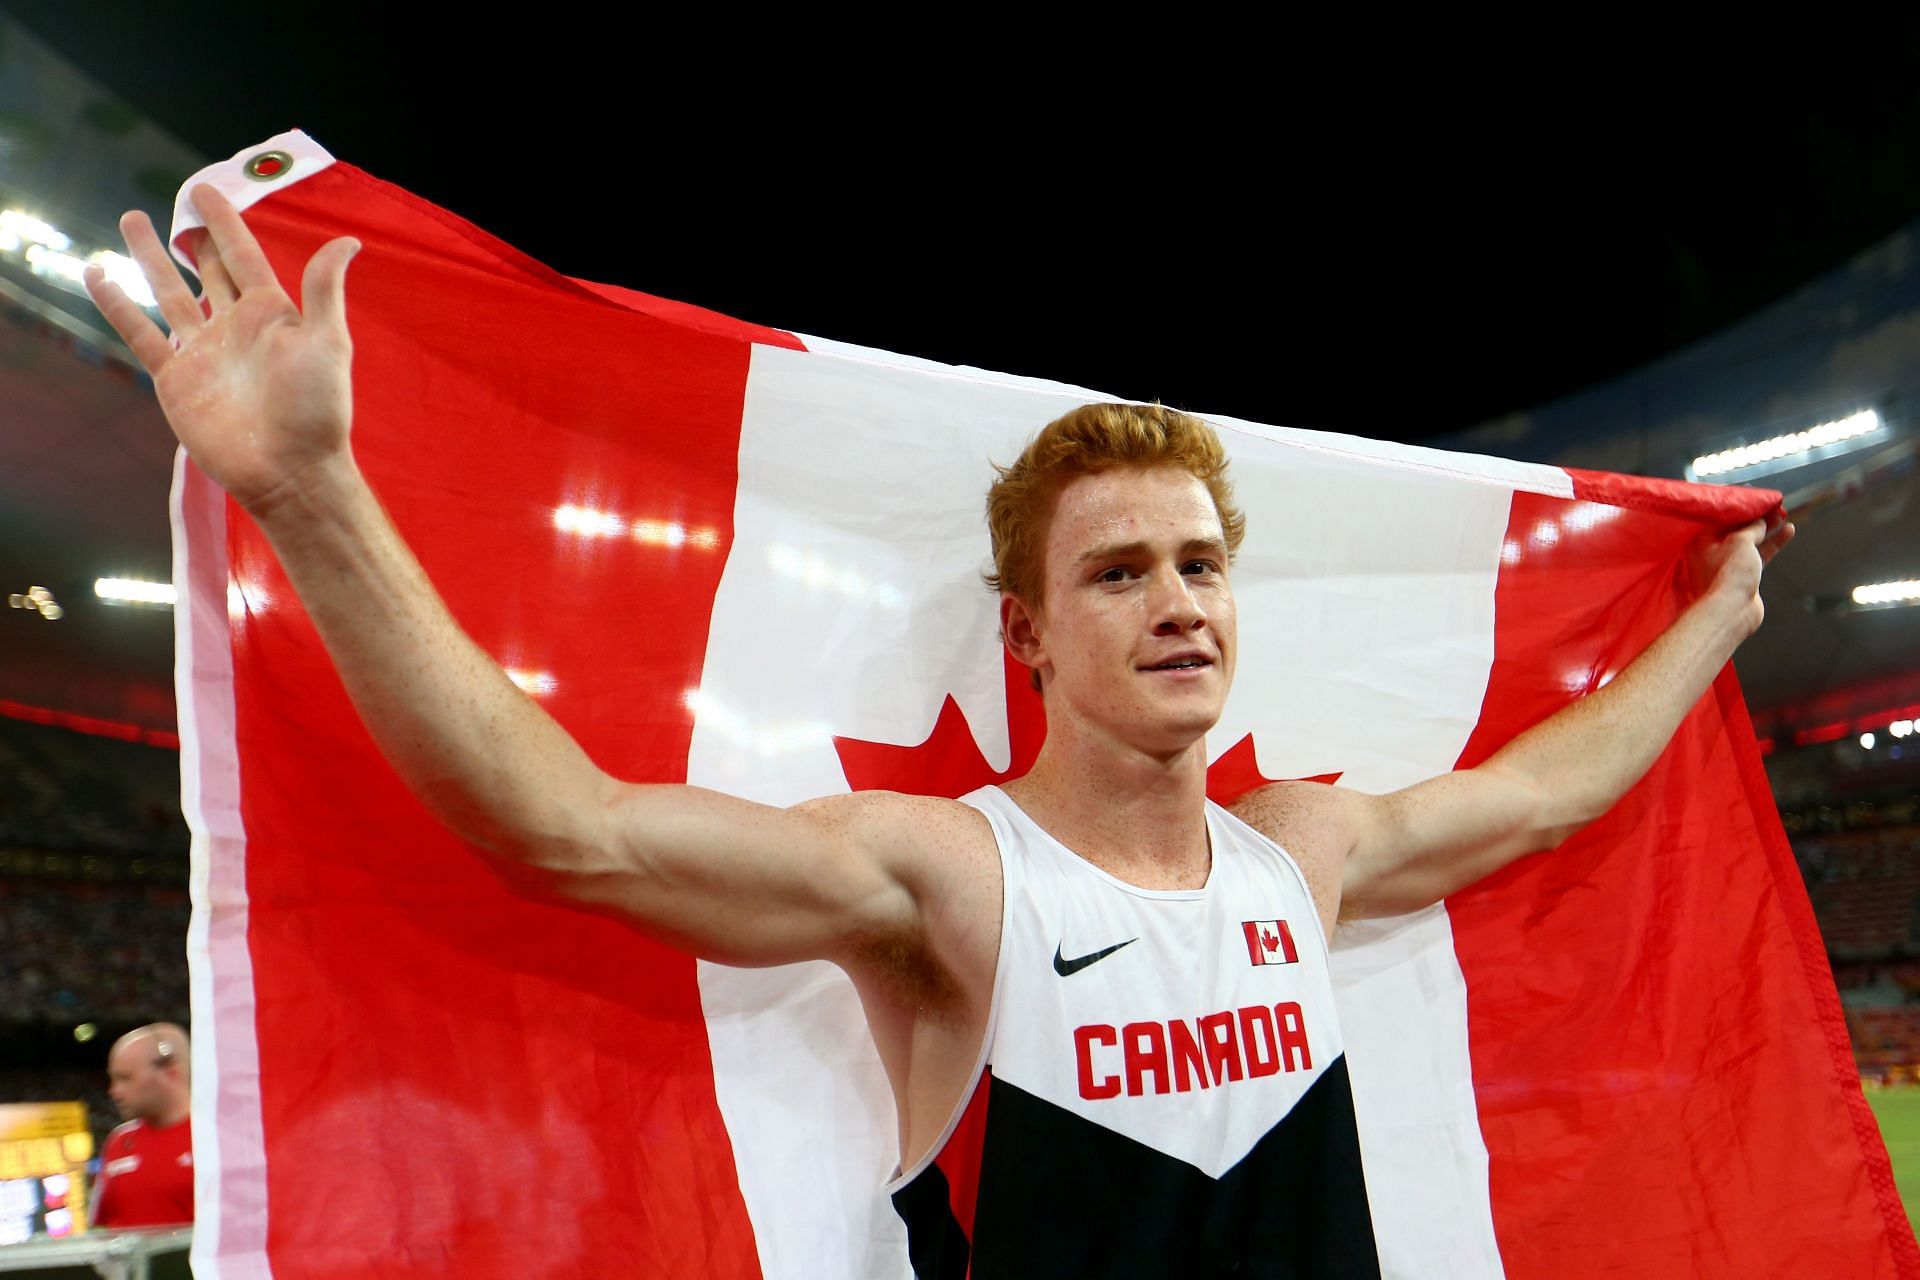 Shawn Barber of Canada celebrates after winning gold in the Men&#039;s Pole Vault final during day three of the 15th IAAF World Athletics Championships at Beijing National Stadium on August 24, 2015, in Beijing, China.